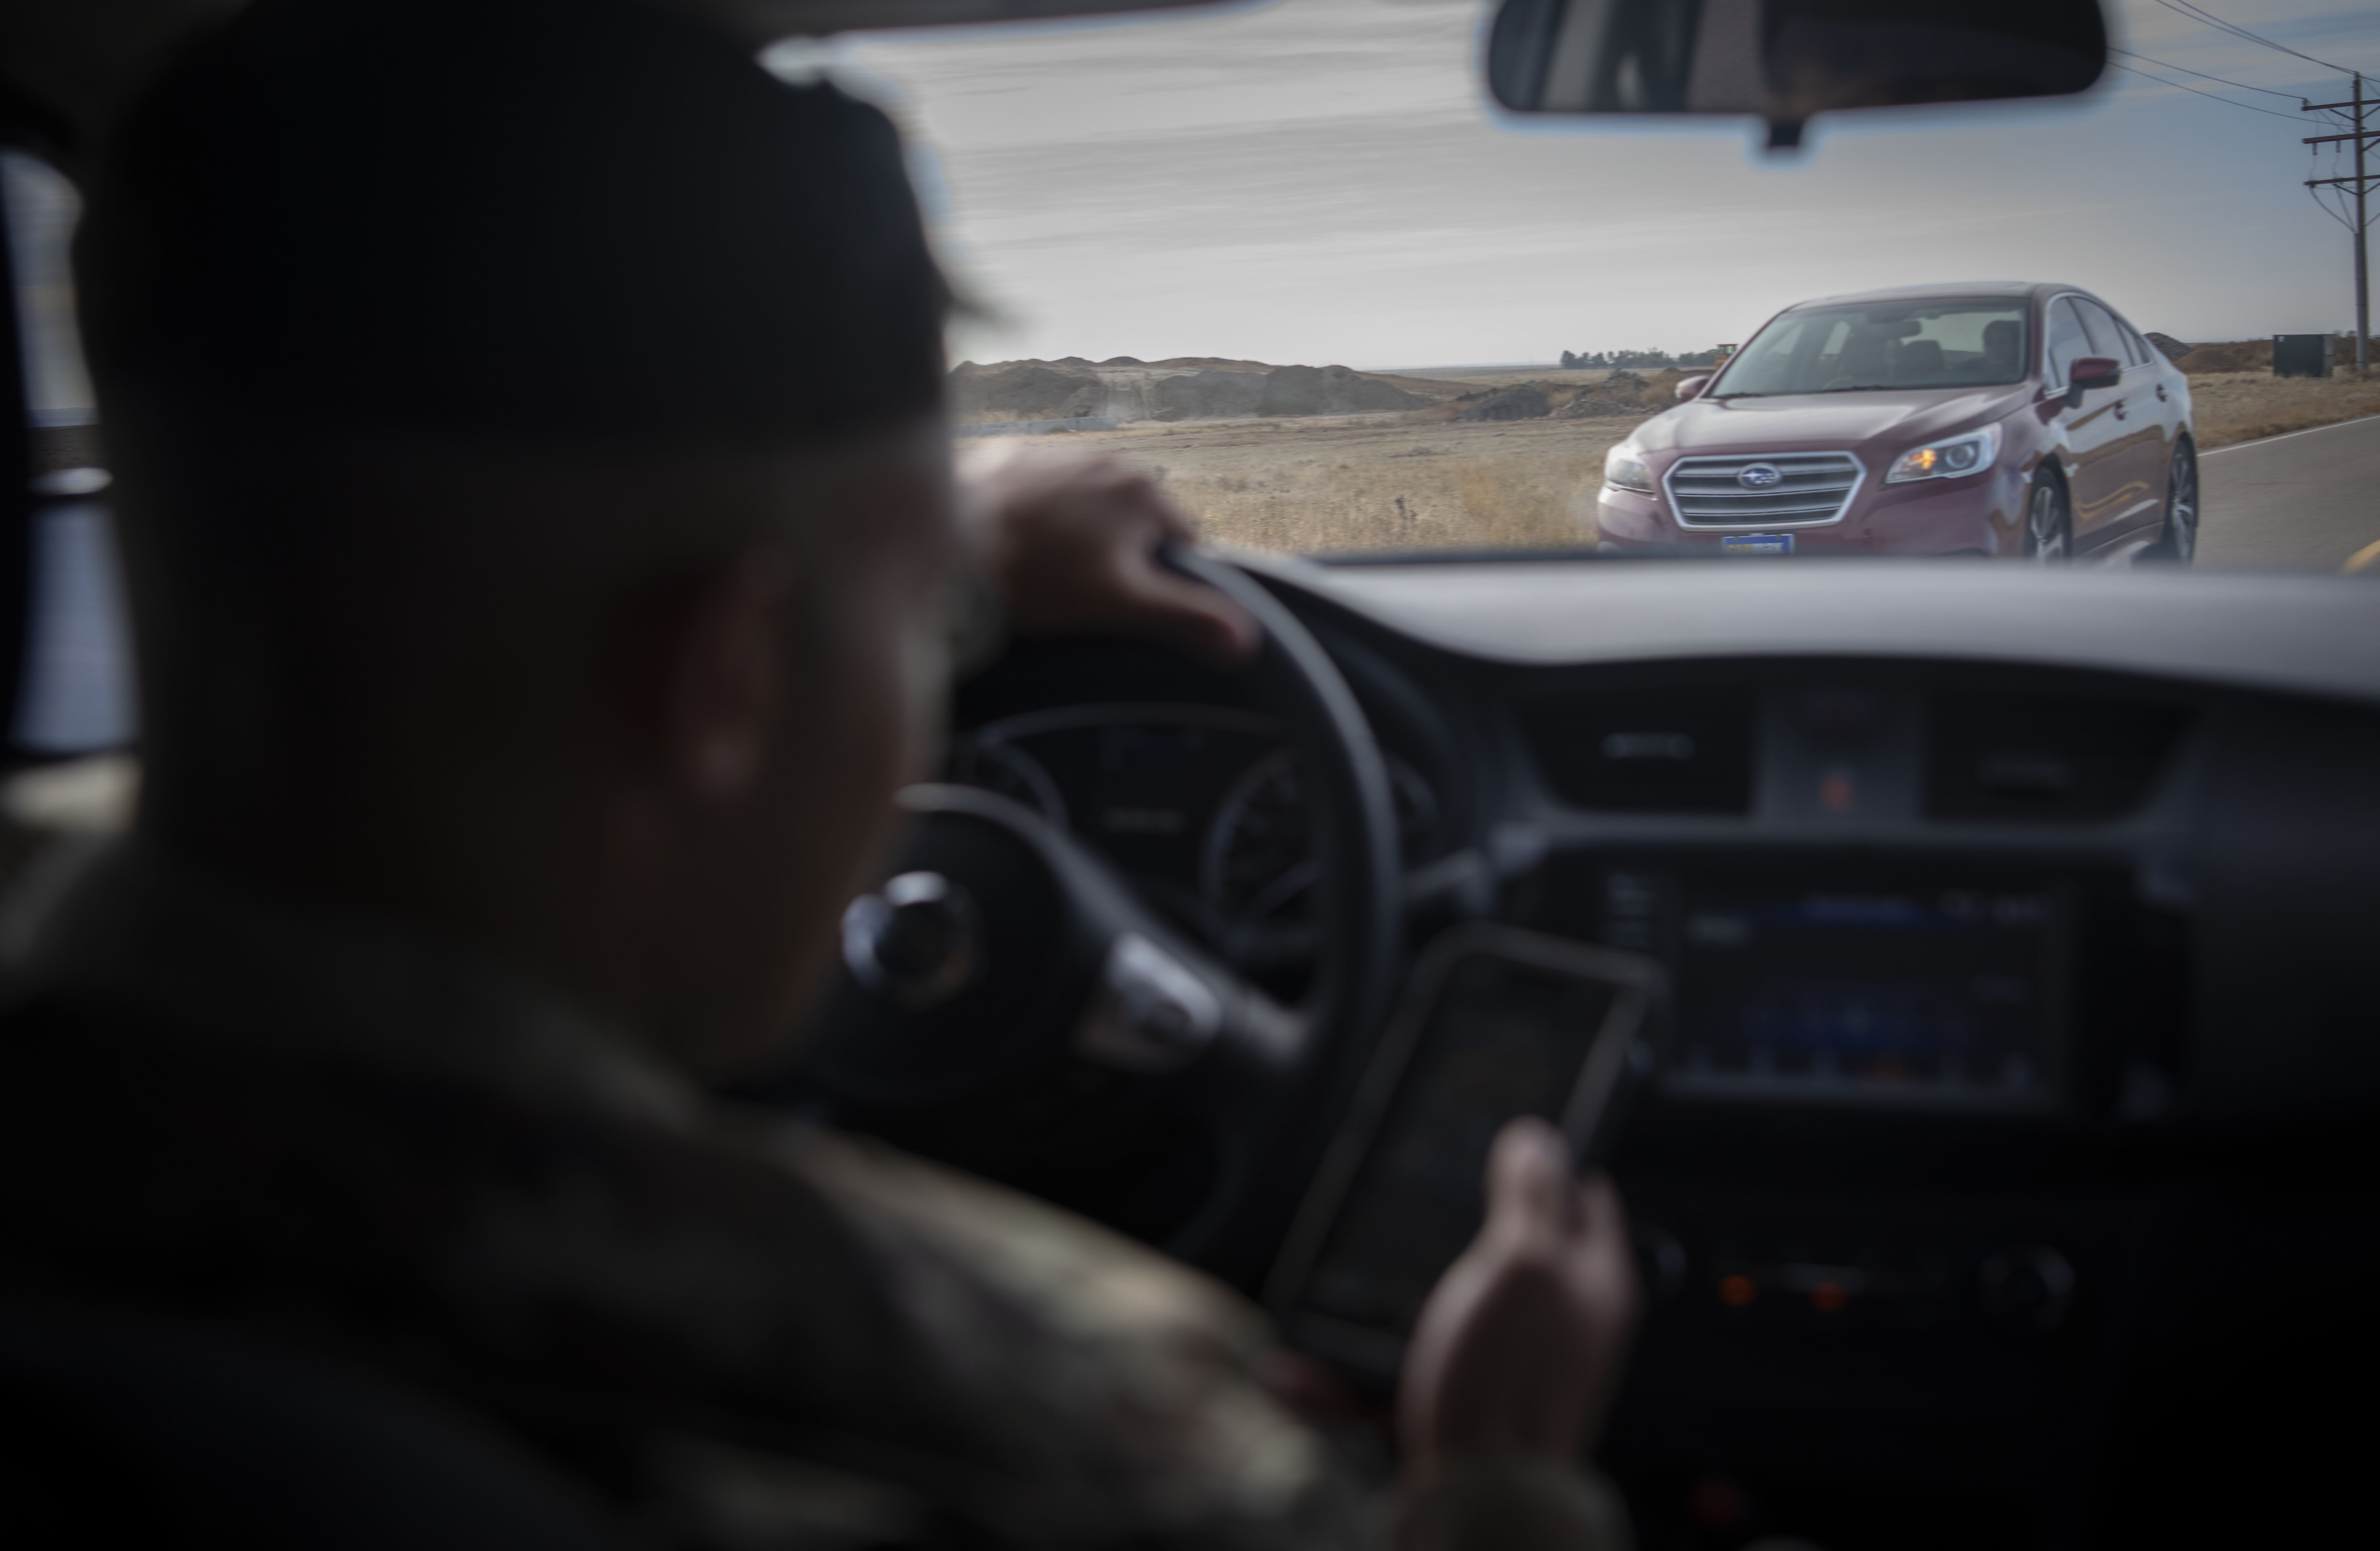 October is Distracted Driving Awareness Month and it’s important Airmen focus on the road and not their phone. There were over 15,000 accidents caused by distracted driving in 2019 according to the Colorado Department of Transportation. (U.S. Space Force photo by Airman 1st Class Jonathan Whitely)